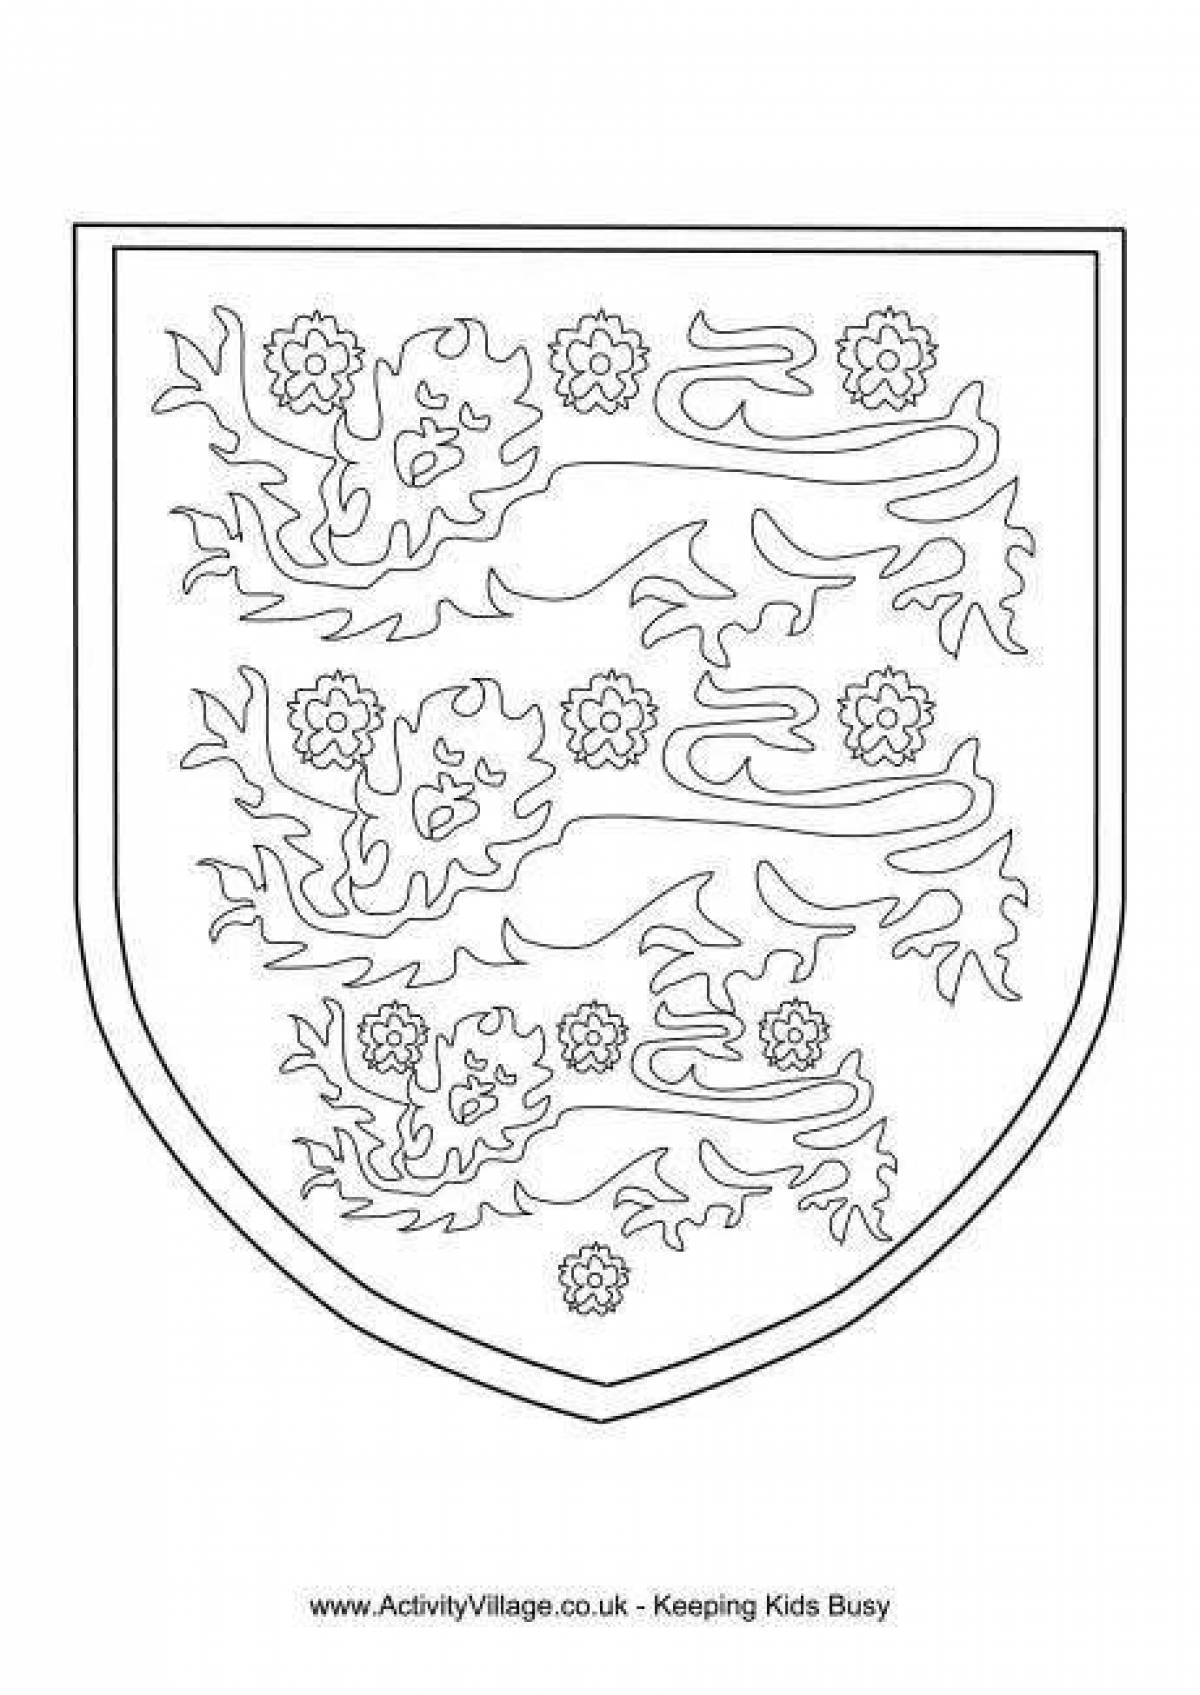 Glorious coat of arms of great britain